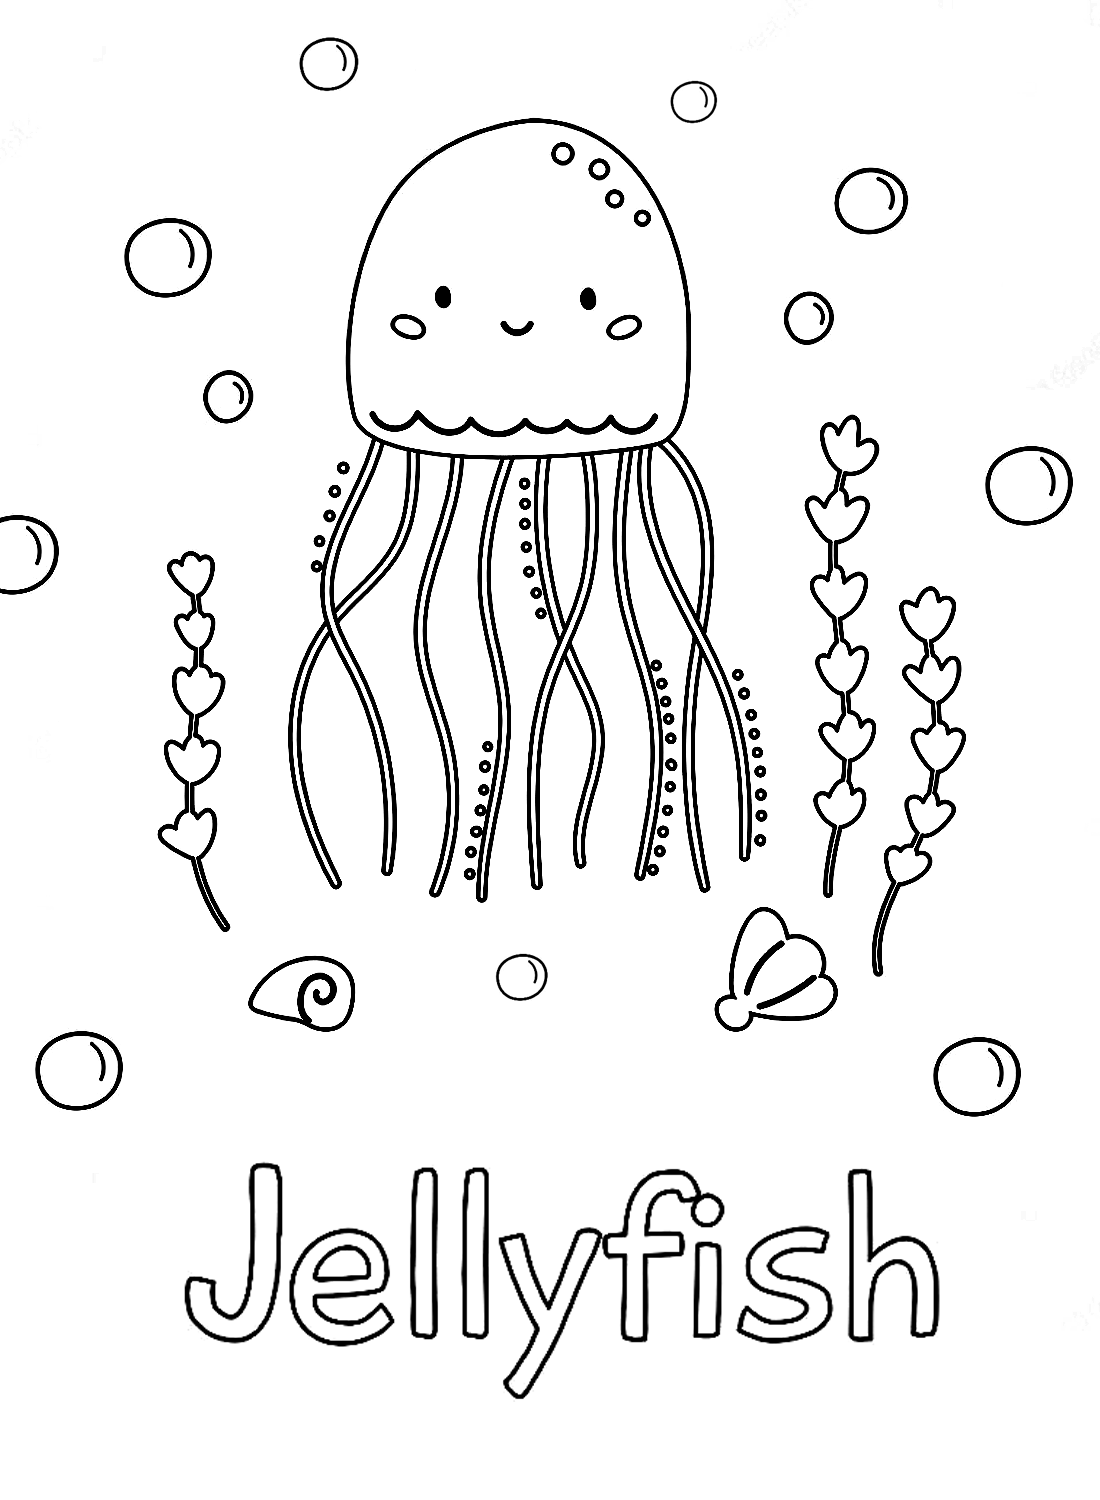 A Jellyfish from Jellyfish